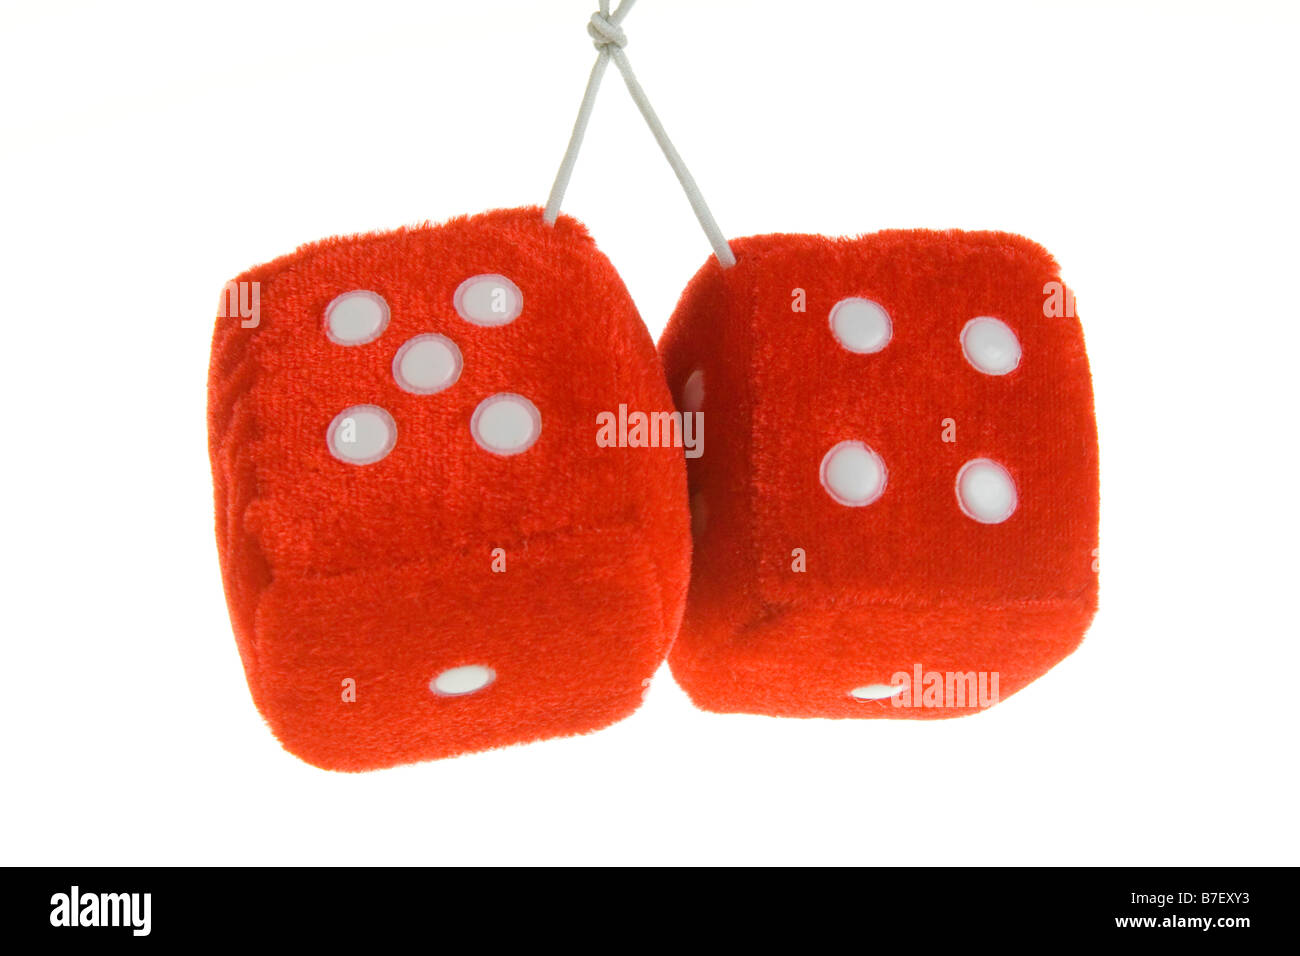 Pair of hanging furry dice on a pure white background. Stock Photo